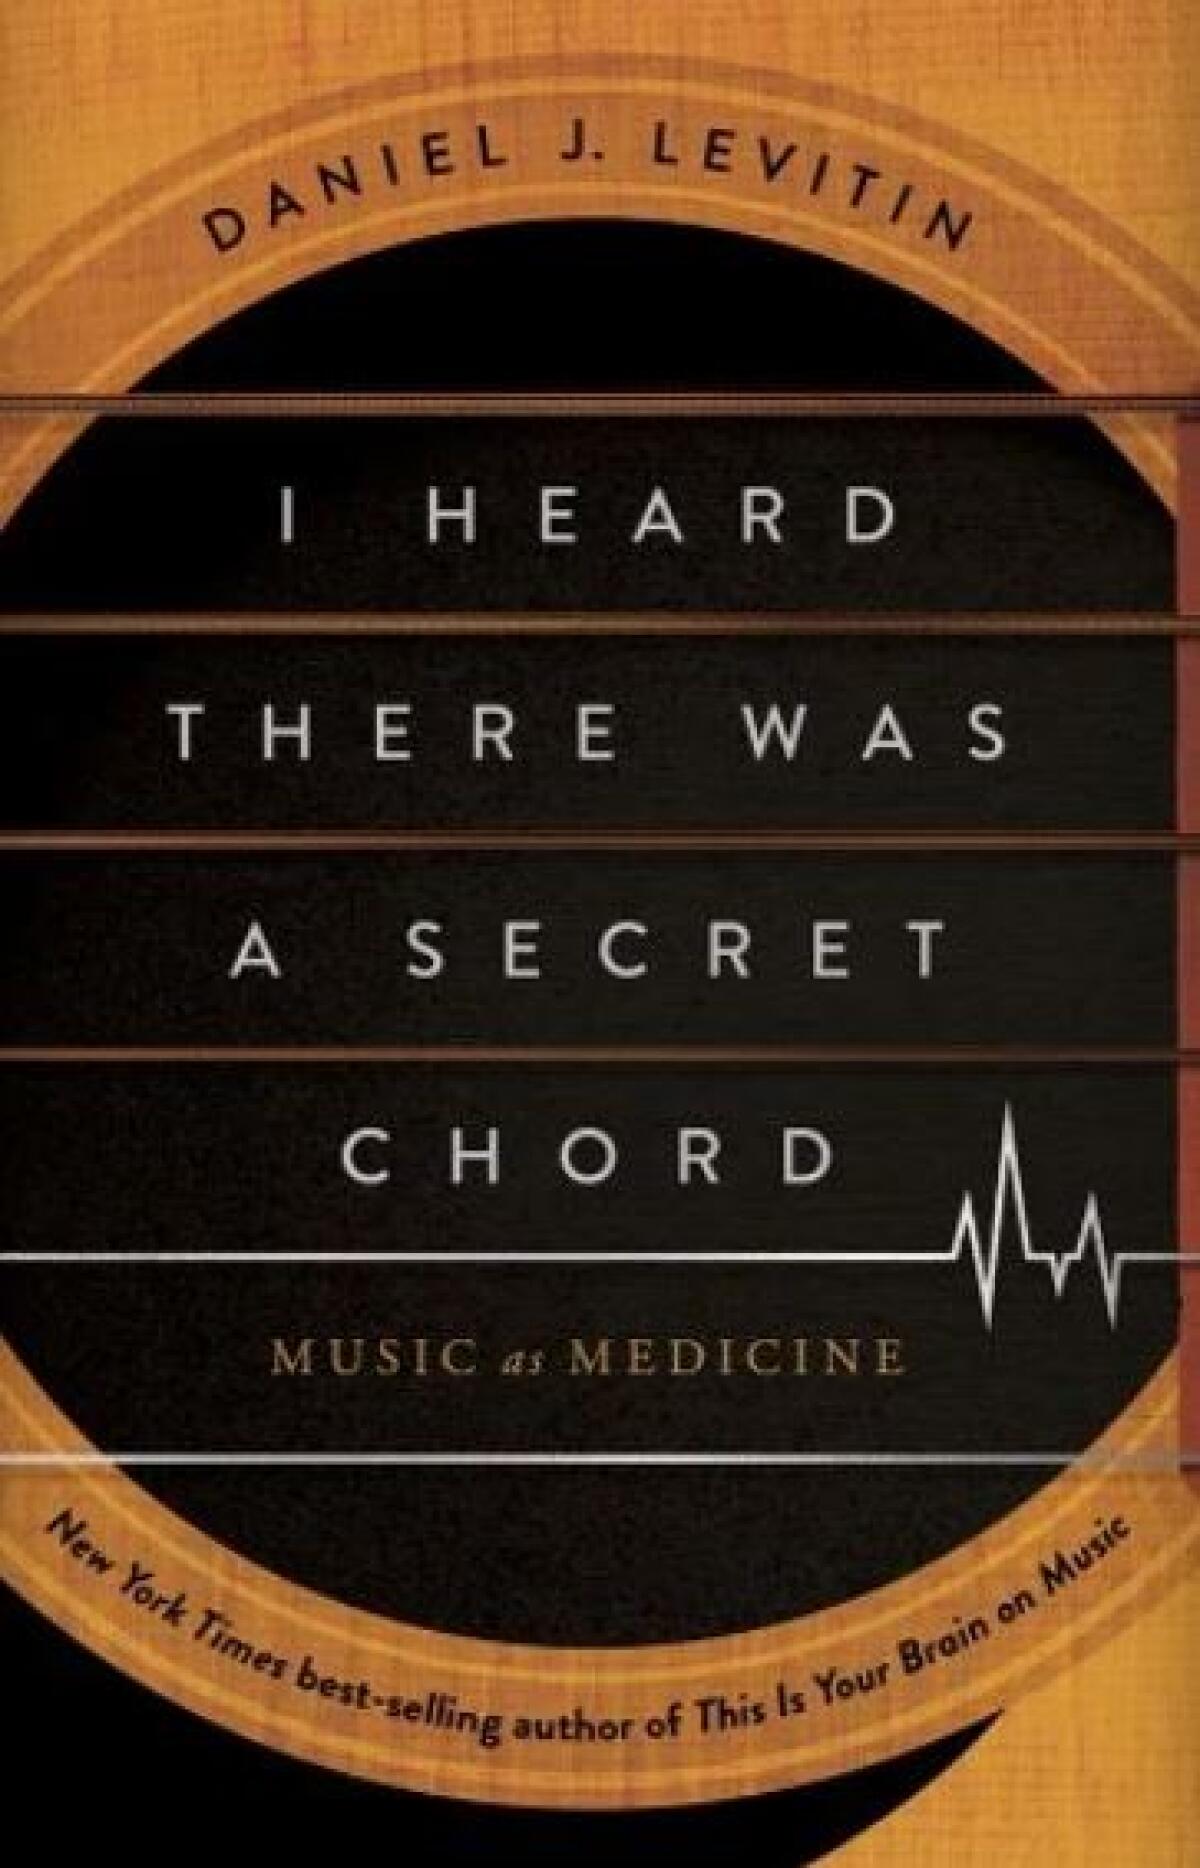 Cover of "I Heard There Was a Secret Chord"